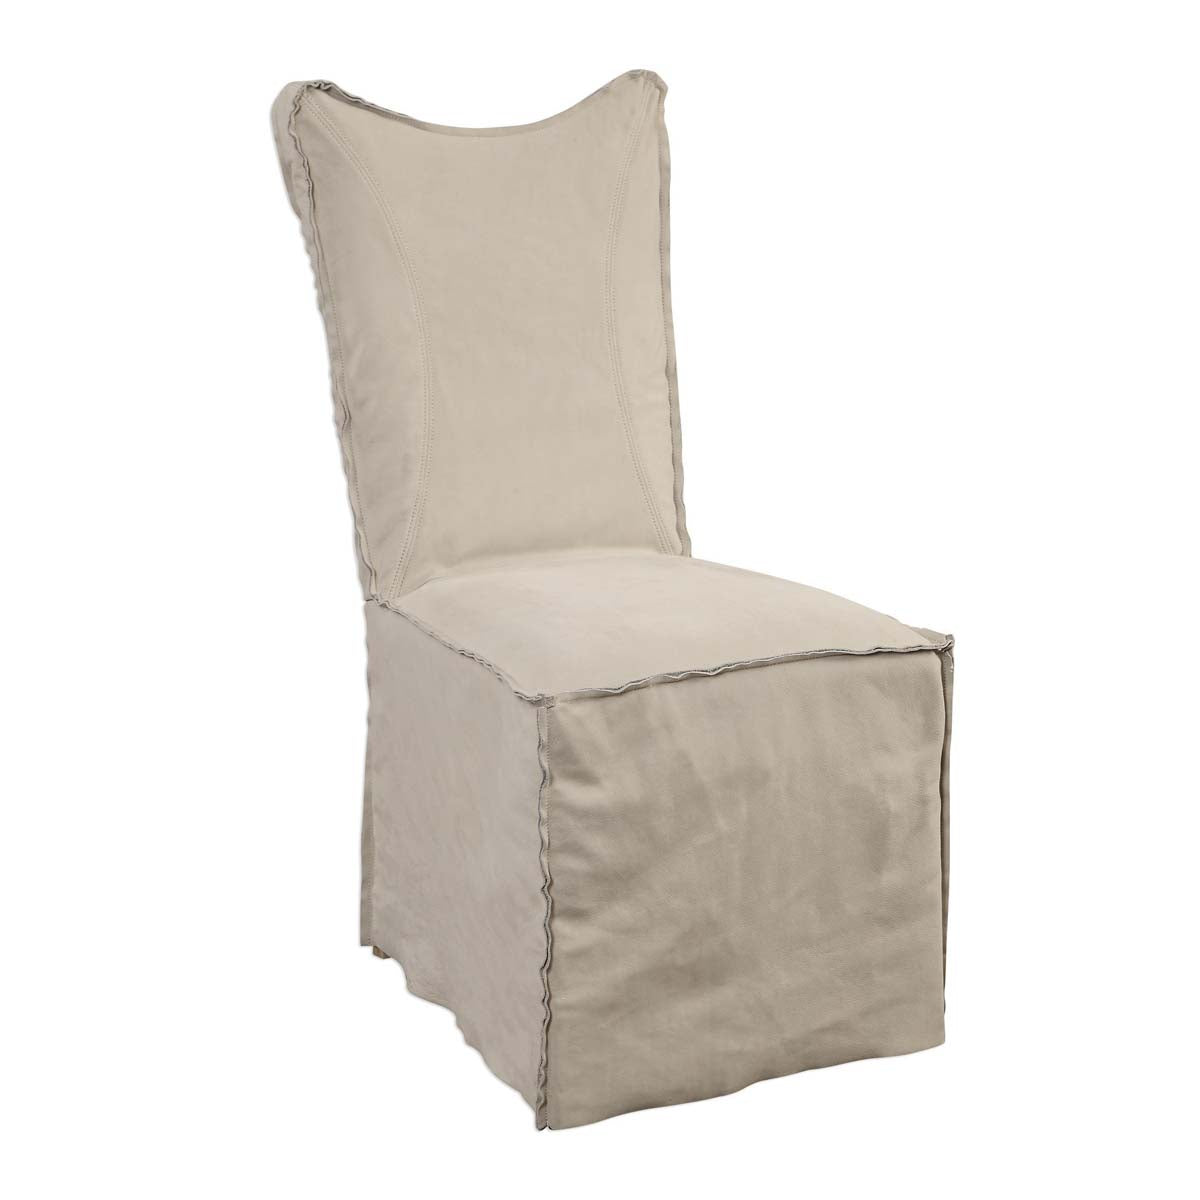 Uttermost Delroy Armless Chairs, Stone Ivory, Set Of 2